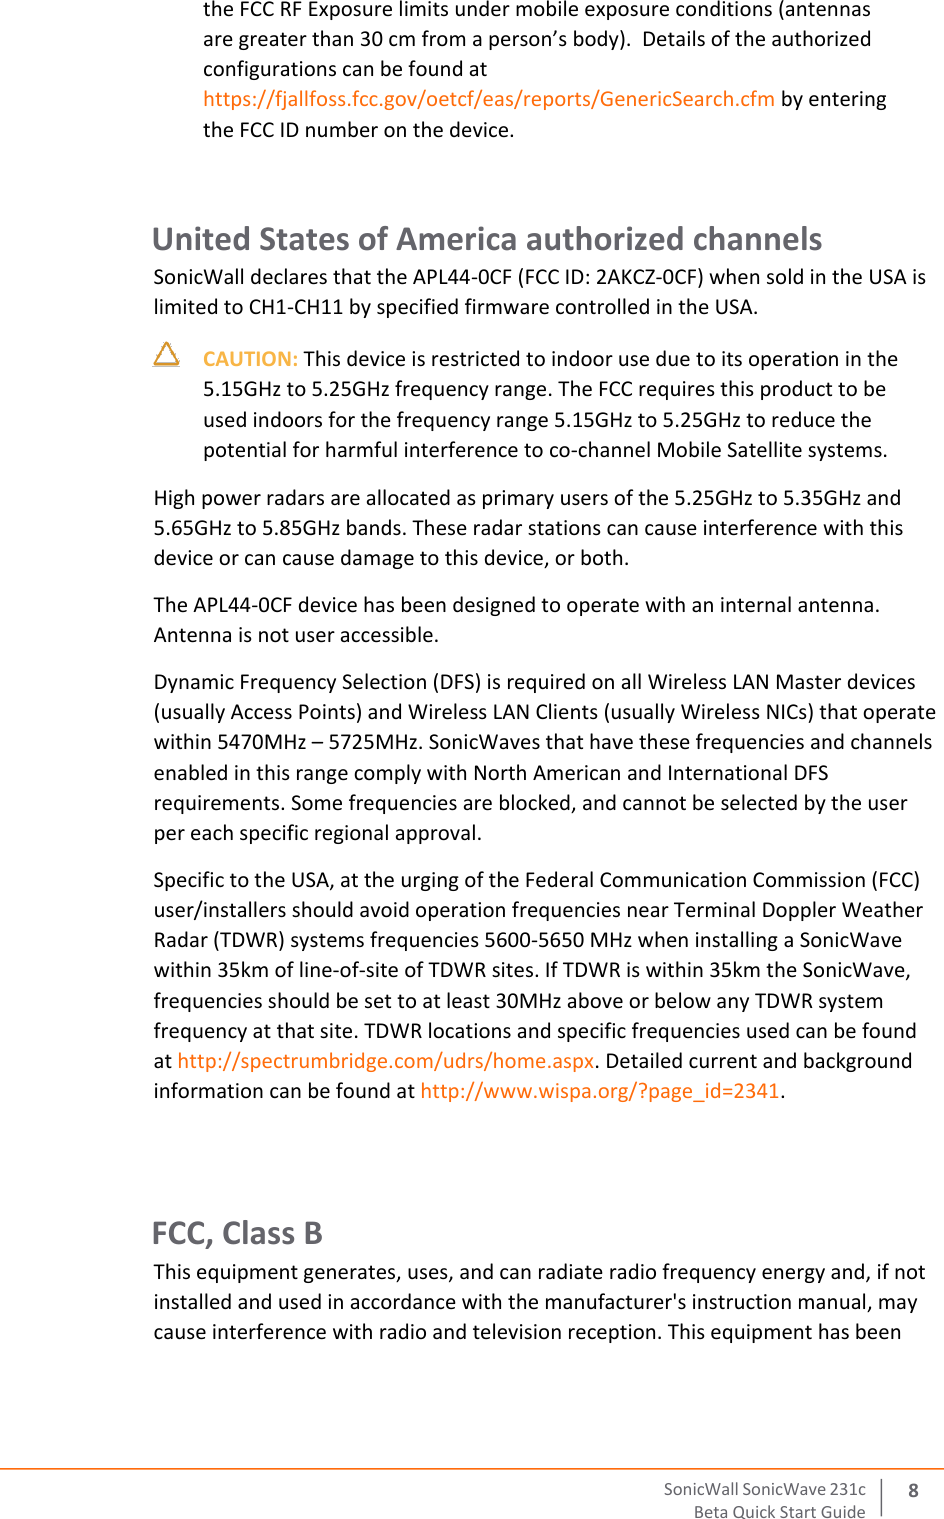  SonicWall   SonicWave   231 c Beta   Quick   Start   Guide 8 the FCC RF Exposure limits under mobile exposure conditions (antennas are greater than 30 cm from a person’s body).  Details of the authorized configurations can be found at https://fjallfoss.fcc.gov/oetcf/eas/reports/GenericSearch.cfm by entering the FCC ID number on the device.  United States of America authorized channels  SonicWall declares that the APL44‐0CF (FCC ID: 2AKCZ‐0CF) when sold in the USA is limited to CH1‐CH11 by specified firmware controlled in the USA.     CAUTION: This device is restricted to indoor use due to its operation in the 5.15GHz to 5.25GHz frequency range. The FCC requires this product to be used indoors for the frequency range 5.15GHz to 5.25GHz to reduce the potential for harmful interference to co‐channel Mobile Satellite systems.  High power radars are allocated as primary users of the 5.25GHz to 5.35GHz and 5.65GHz to 5.85GHz bands. These radar stations can cause interference with this device or can cause damage to this device, or both.  The APL44‐0CF device has been designed to operate with an internal antenna. Antenna is not user accessible.  Dynamic Frequency Selection (DFS) is required on all Wireless LAN Master devices (usually Access Points) and Wireless LAN Clients (usually Wireless NICs) that operate within 5470MHz – 5725MHz. SonicWaves that have these frequencies and channels enabled in this range comply with North American and International DFS requirements. Some frequencies are blocked, and cannot be selected by the user per each specific regional approval.  Specific to the USA, at the urging of the Federal Communication Commission (FCC) user/installers should avoid operation frequencies near Terminal Doppler Weather Radar (TDWR) systems frequencies 5600‐5650 MHz when installing a SonicWave within 35km of line‐of‐site of TDWR sites. If TDWR is within 35km the SonicWave, frequencies should be set to at least 30MHz above or below any TDWR system frequency at that site. TDWR locations and specific frequencies used can be found at http://spectrumbridge.com/udrs/home.aspx. Detailed current and background information can be found at http://www.wispa.org/?page_id=2341.   FCC, Class B  This equipment generates, uses, and can radiate radio frequency energy and, if not installed and used in accordance with the manufacturer&apos;s instruction manual, may cause interference with radio and television reception. This equipment has been 